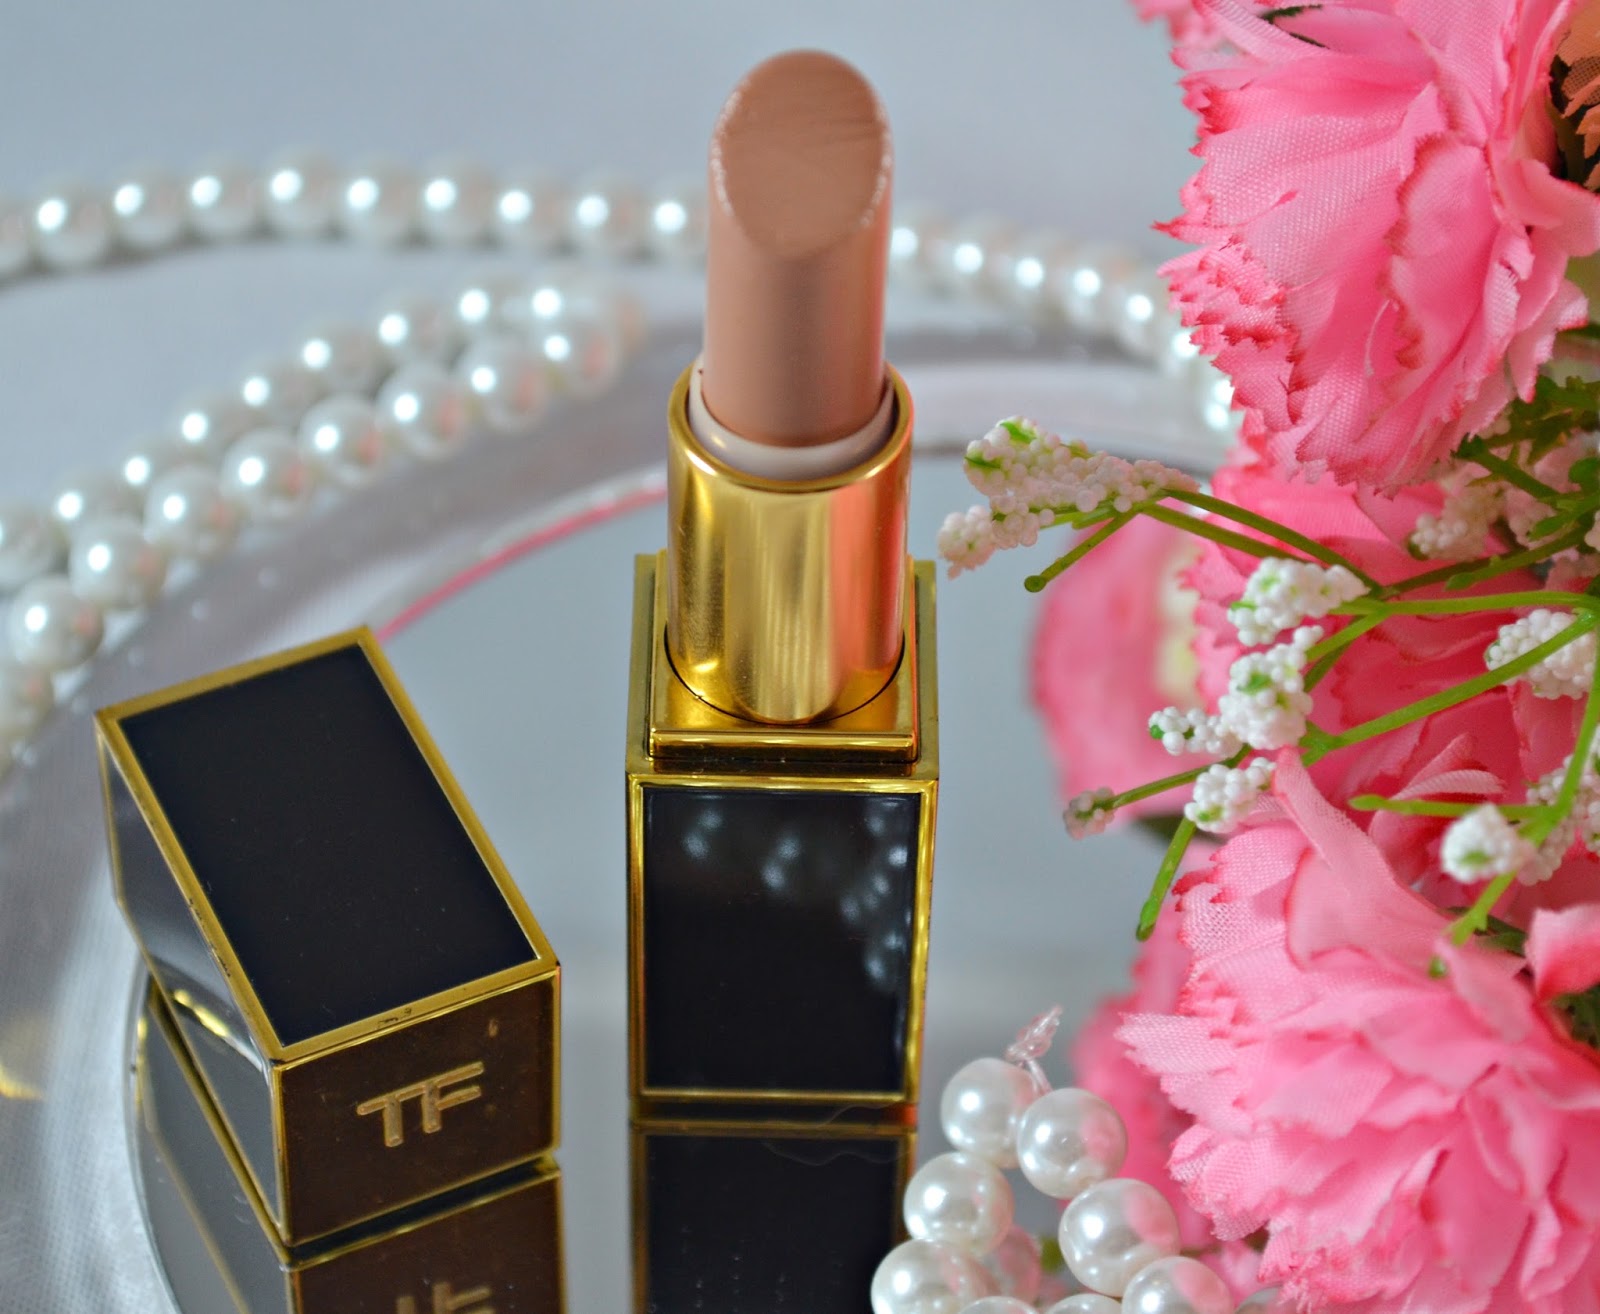 Tom Ford: Sable Smoke | All About Beauty 101